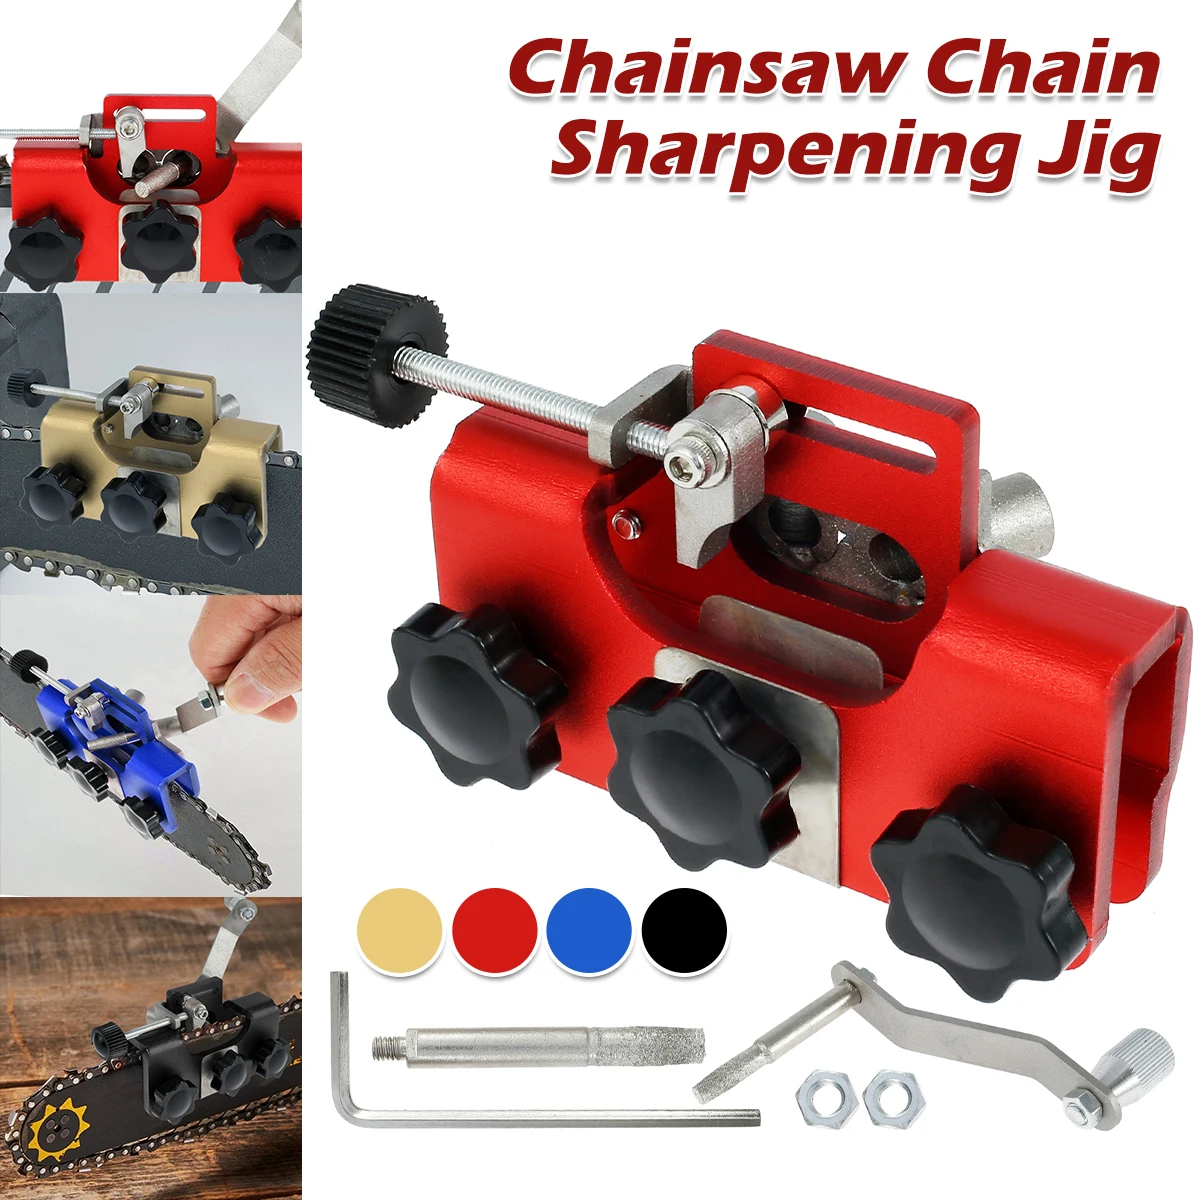 

For Most Chain Saws Electric Saws Chainsaw Sharpener With 1 Grinder Stones Chainsaw Chain Sharpening Jig Chain Saw Sharpen Tool